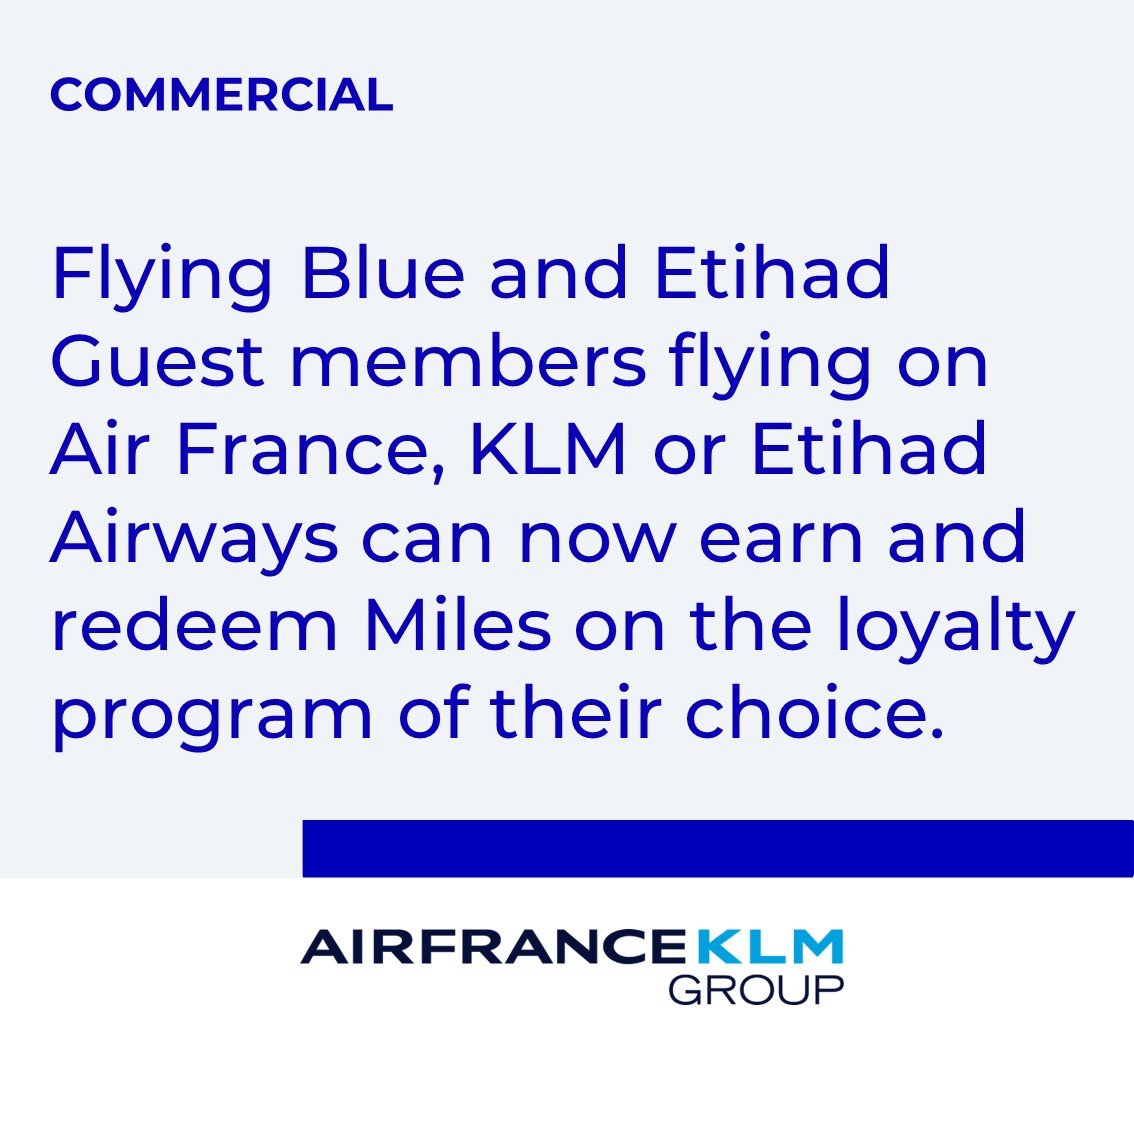 Following the MoU signed between the two airline Groups in September 2023, #AirFrance-KLM and @Etihad Airways announce frequent flyer partnership. bit.ly/3Gn4US8